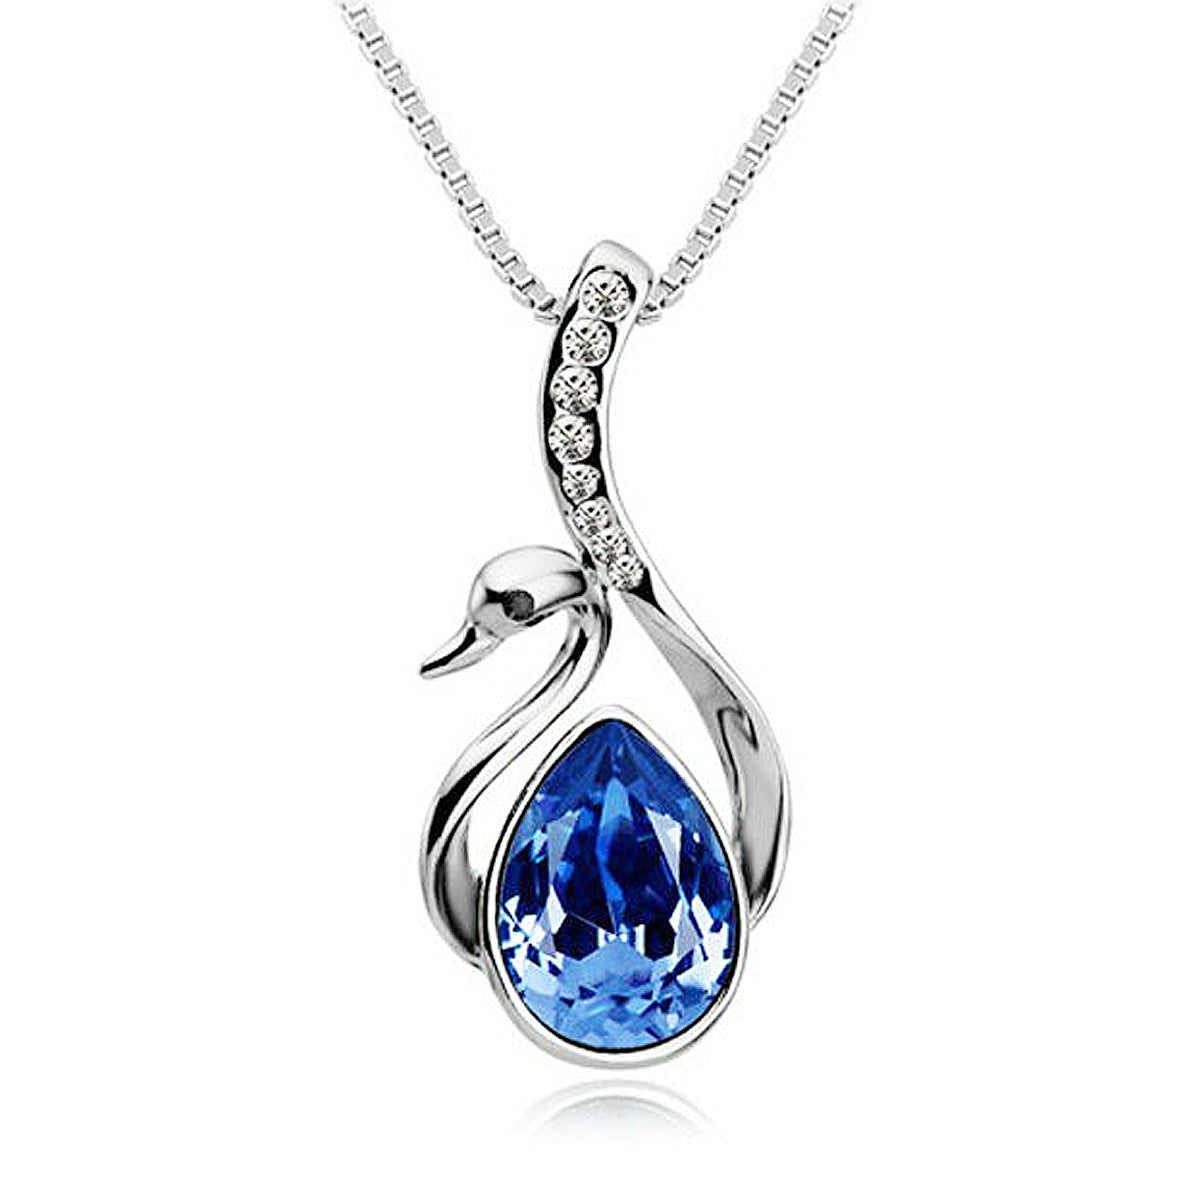 Wrapables Crystal Swan Pendant Necklace